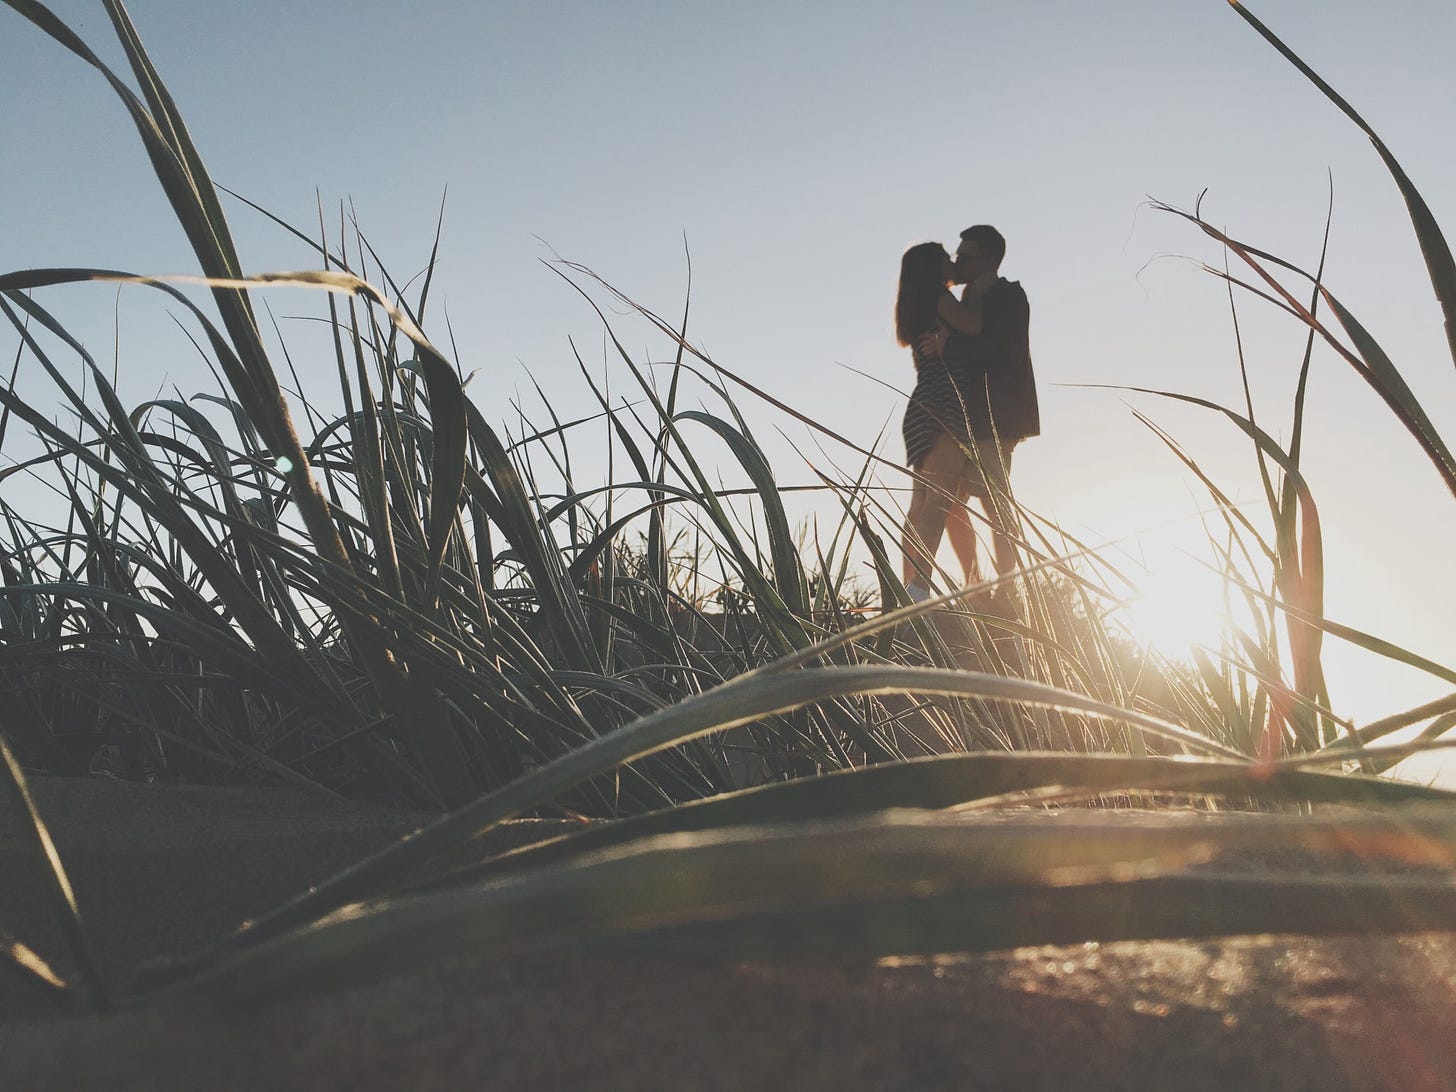 The profile of a couple embraces and kisses as the sun sets over a grassy field.